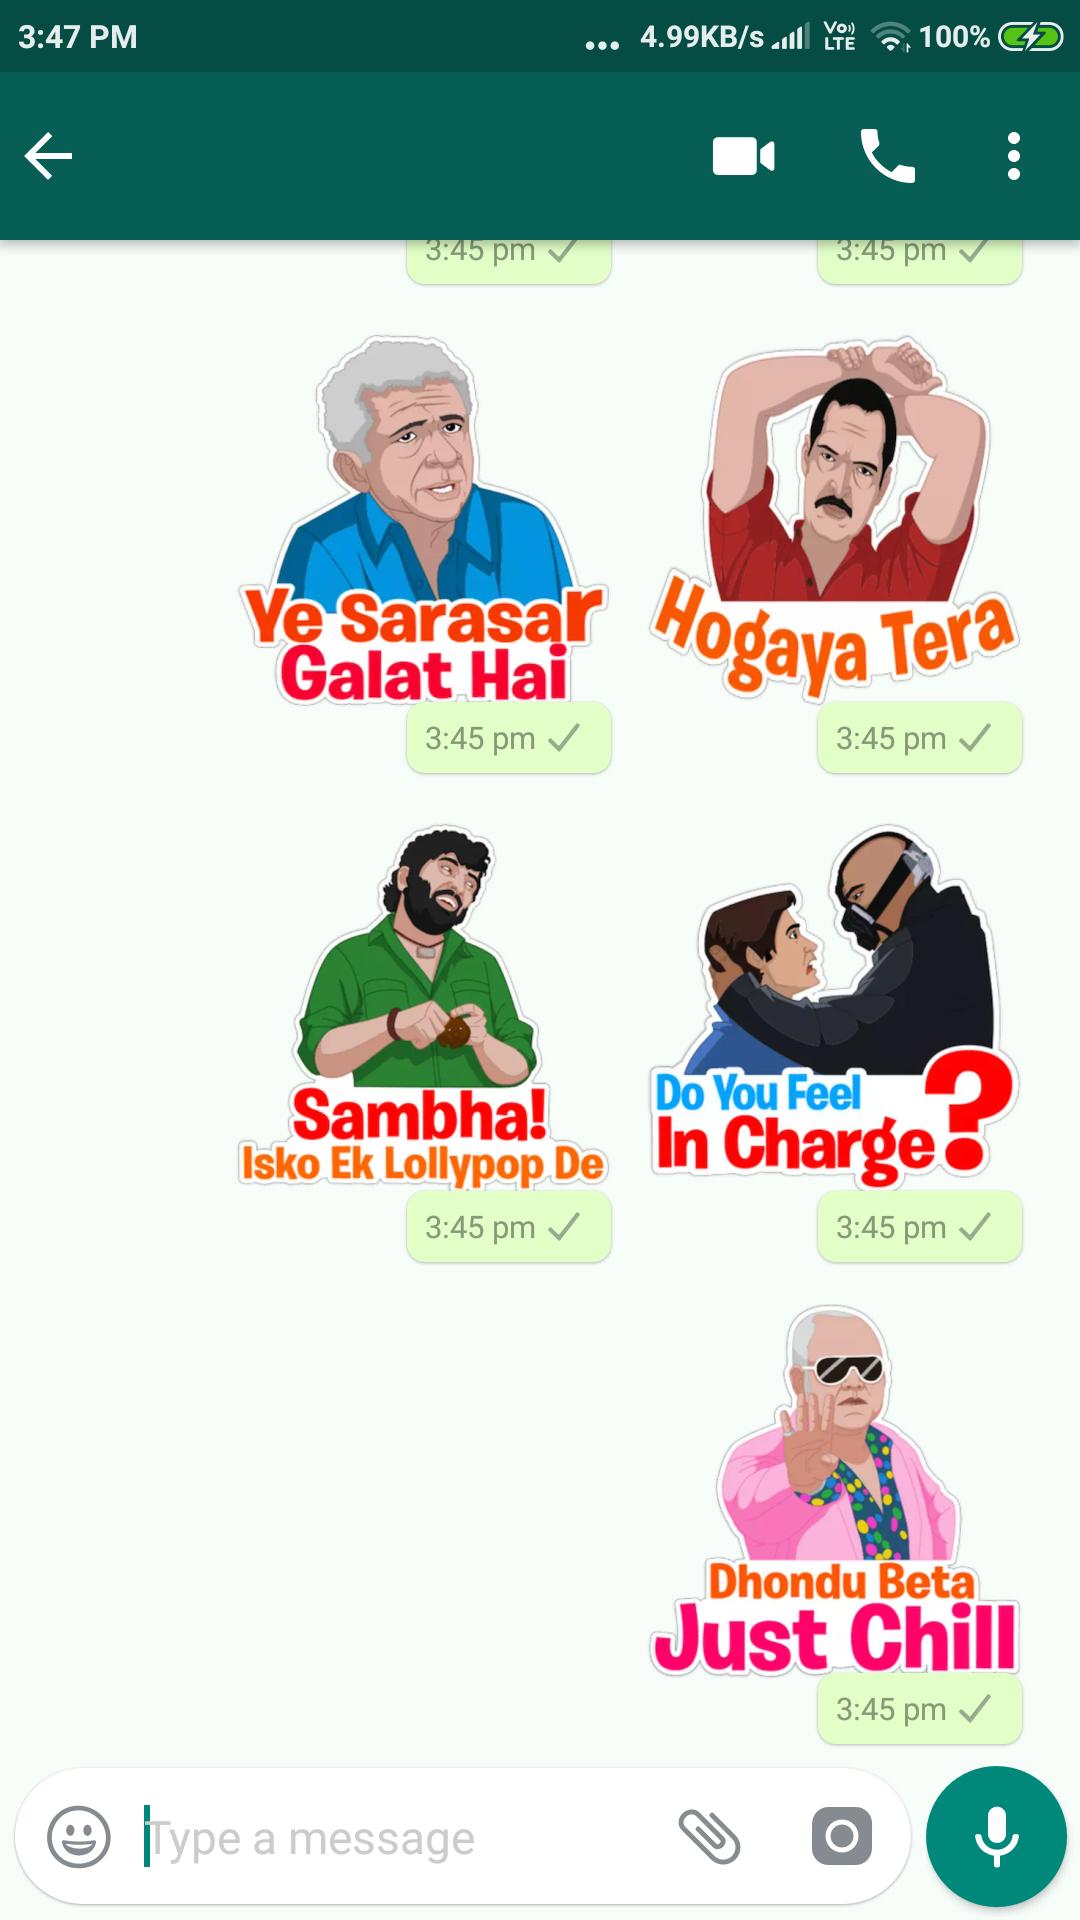 Wastickerapps Hindi Stickers Wastickers For Android Apk Download